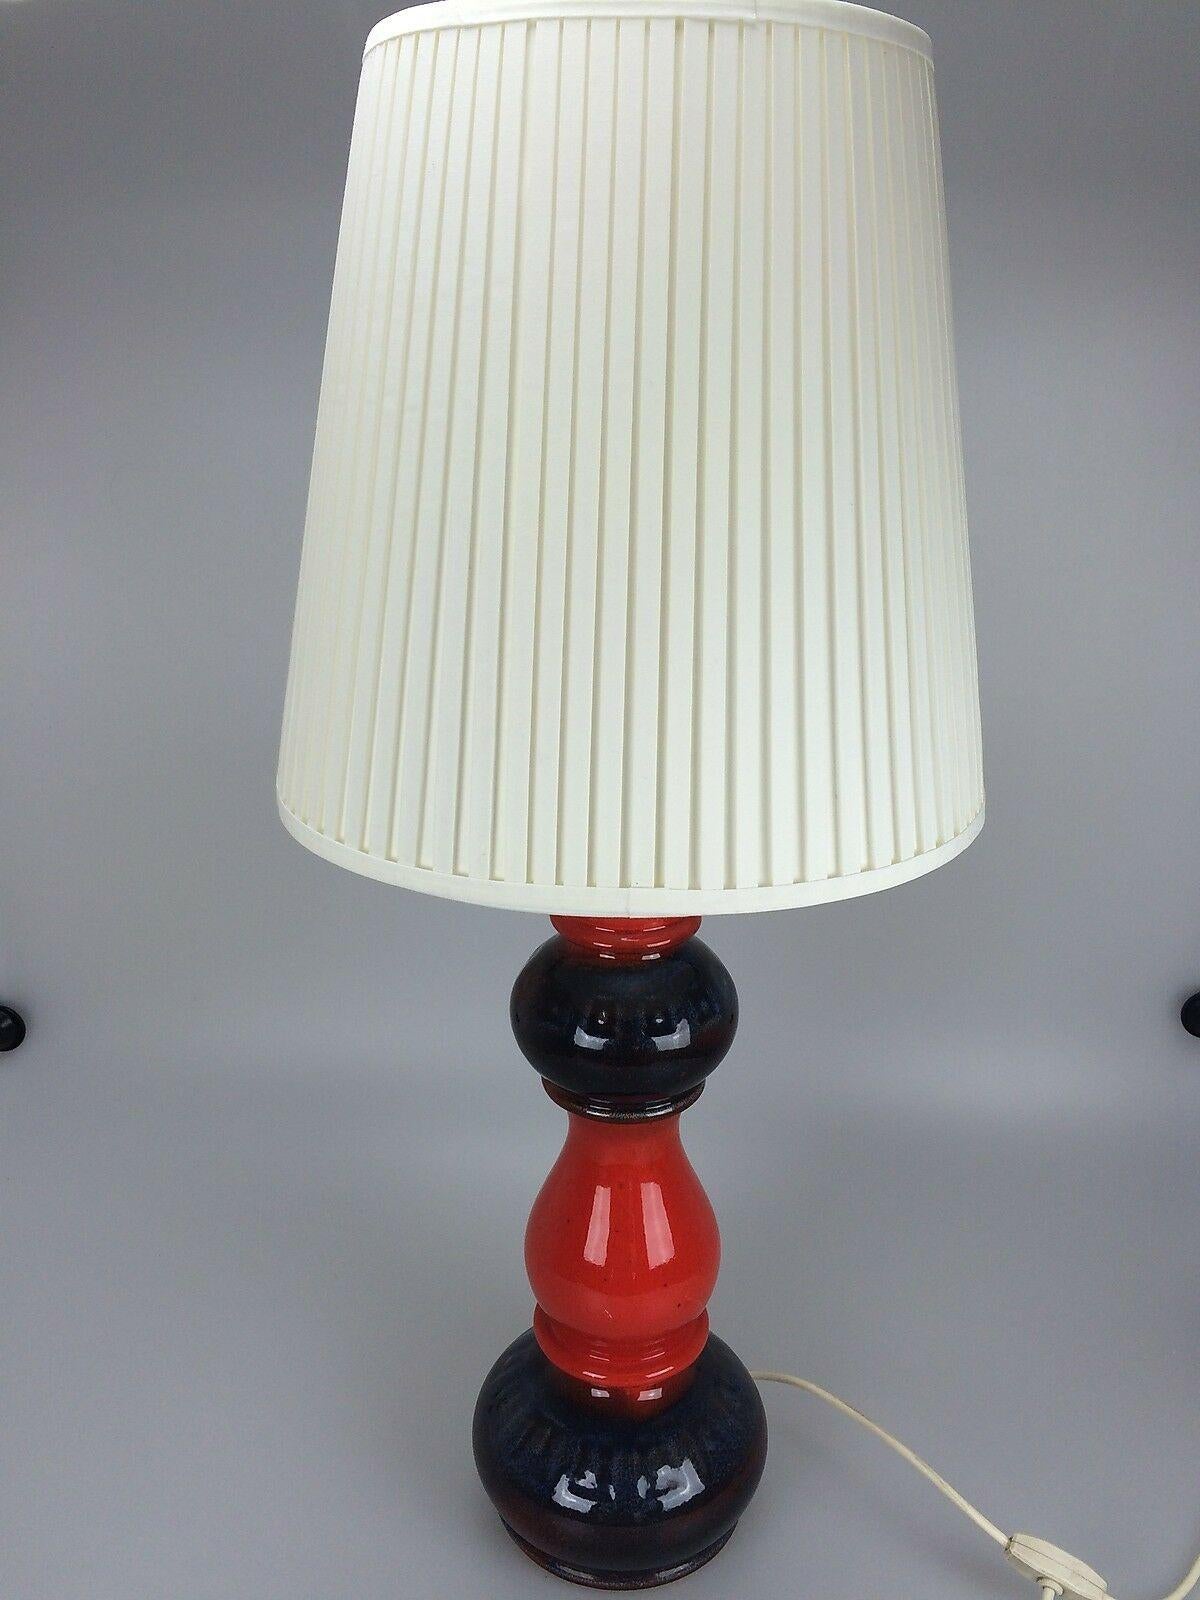 70s Lamp Light Table Lamp Ceramic Space Age Design Red For Sale 1